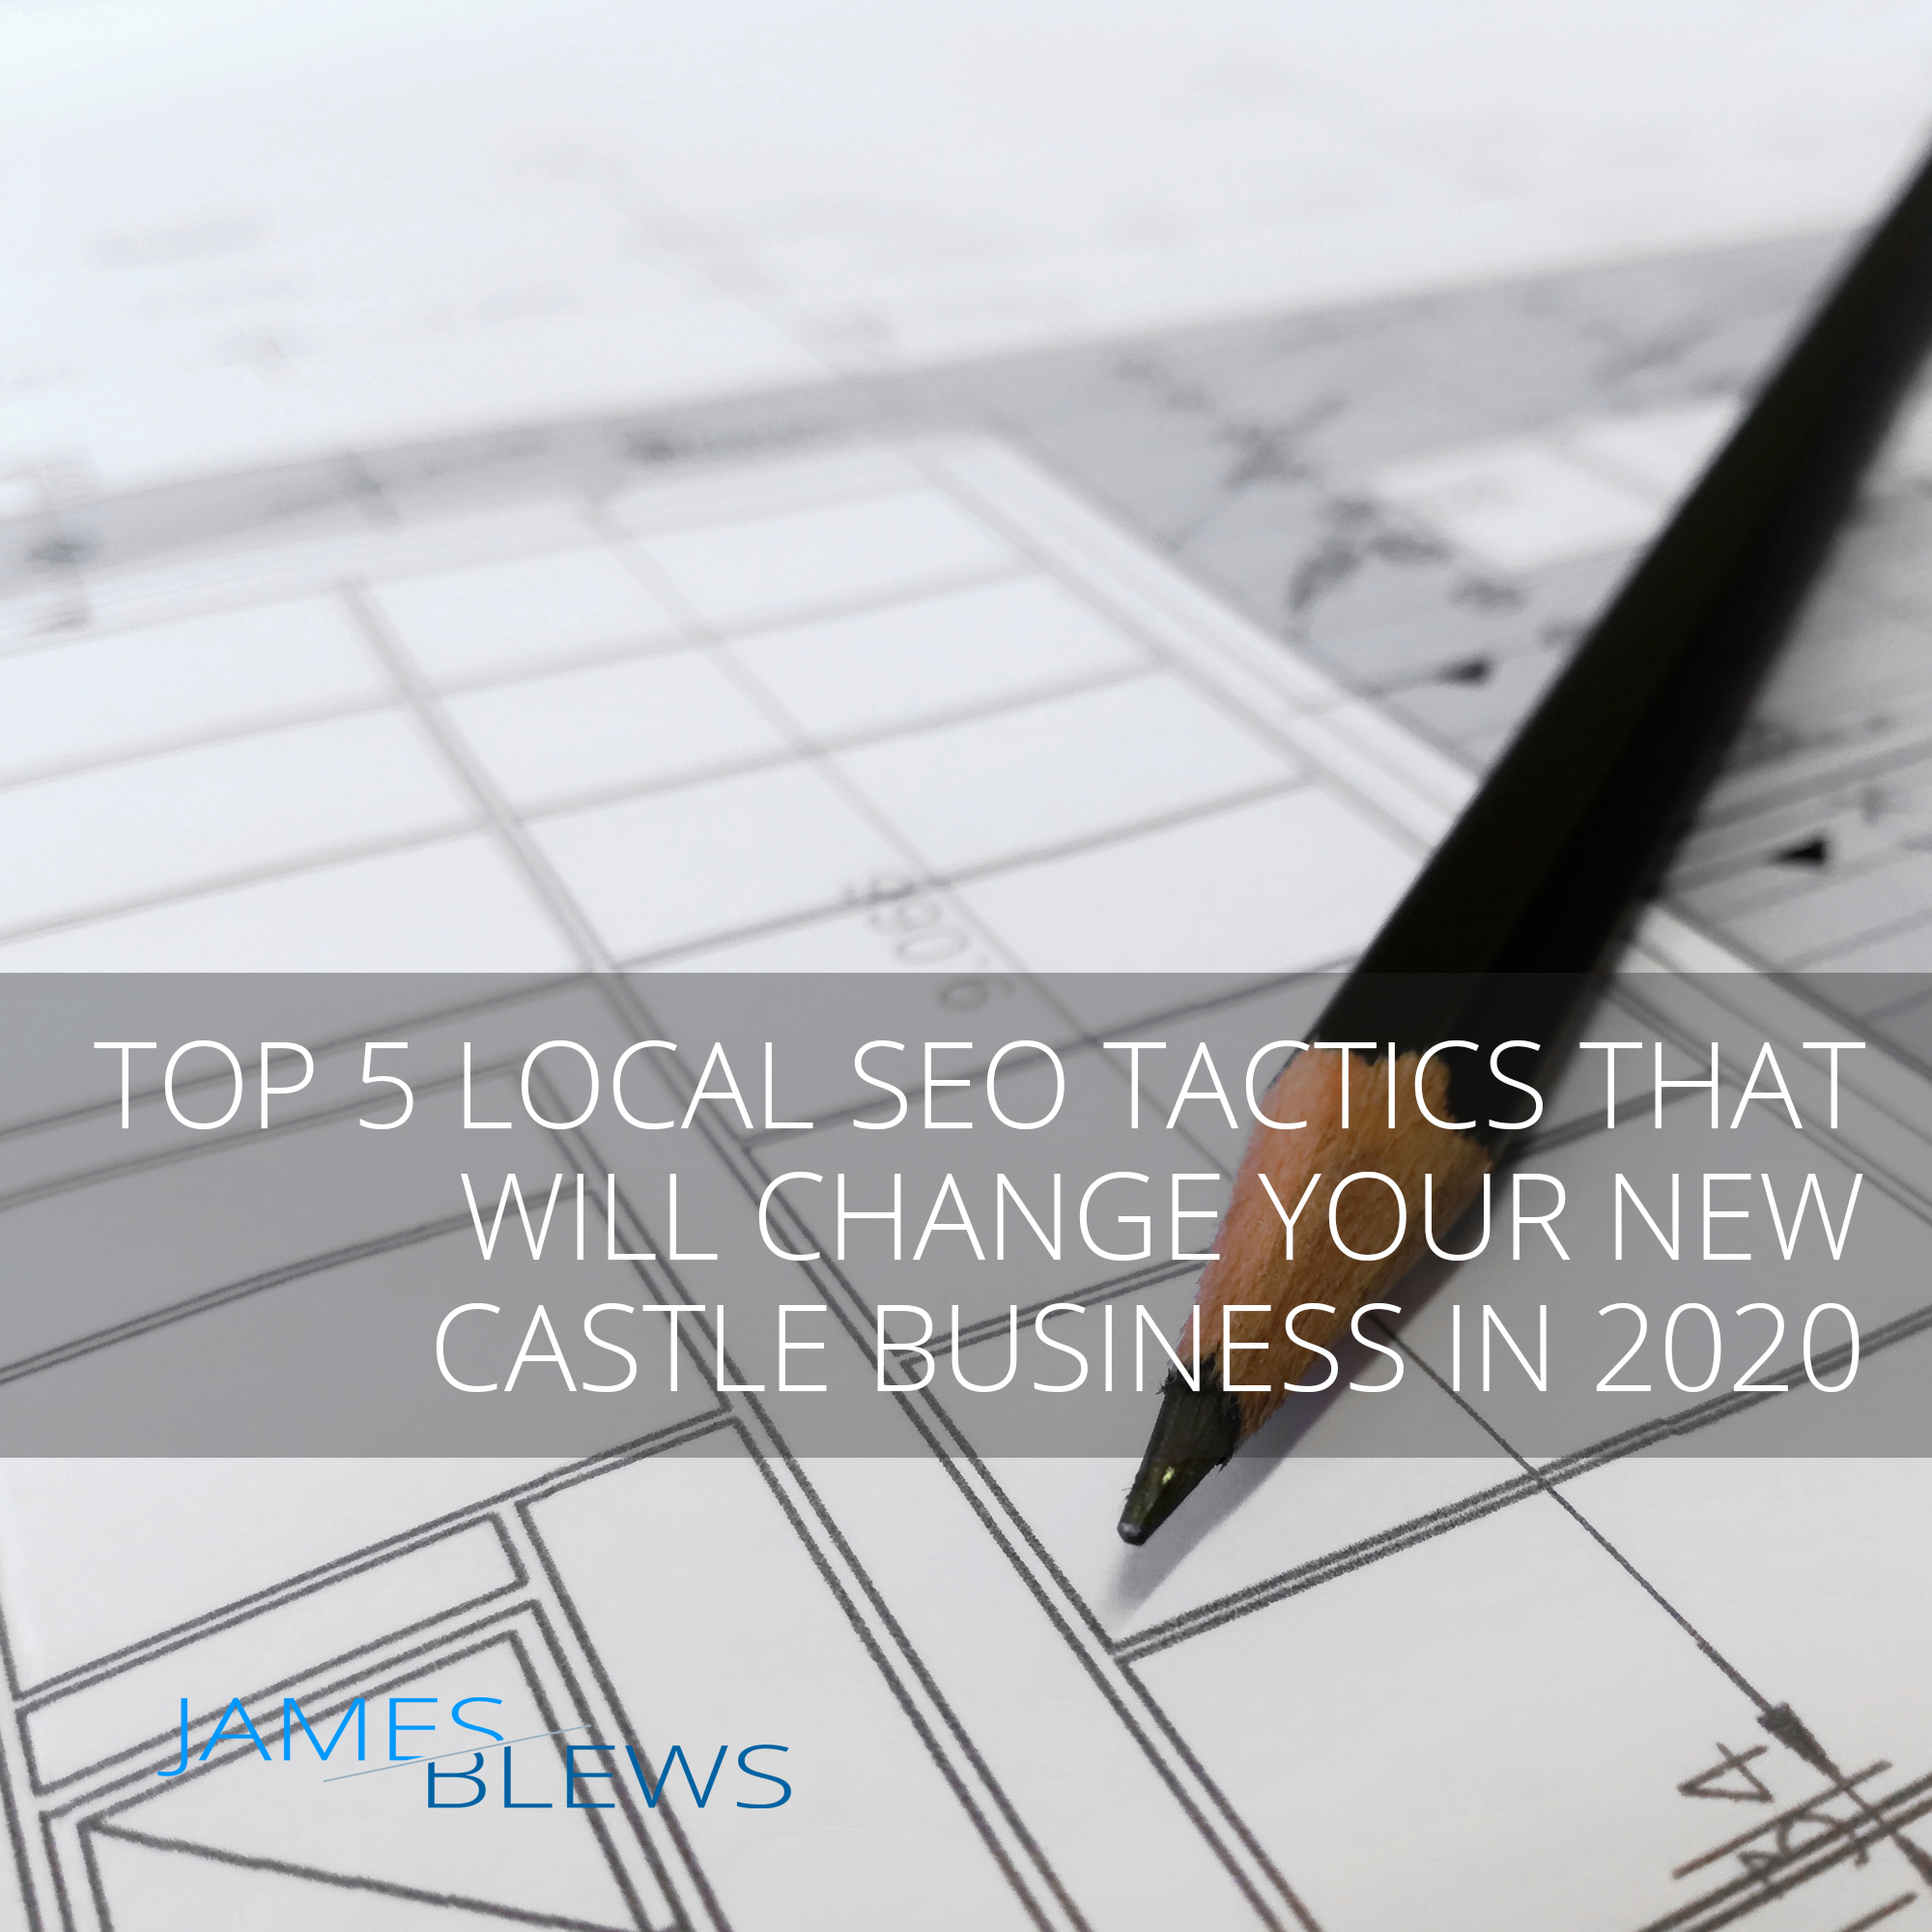 Top 5 Local SEO Tactics That Will Change Your New Castle Business In 2020